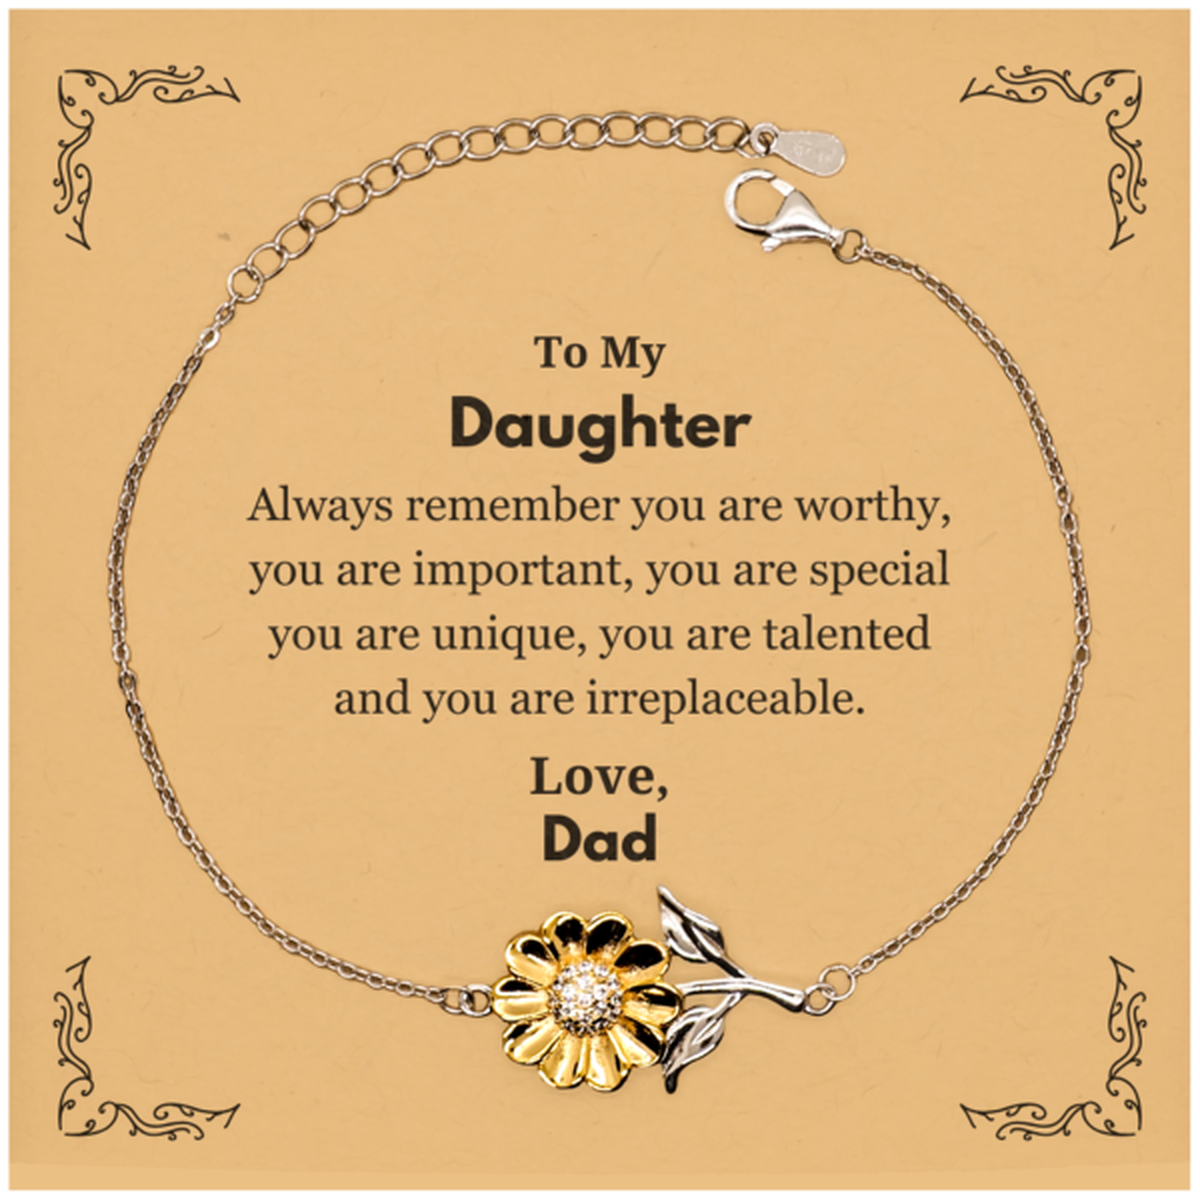 Daughter Birthday Gifts from Dad, Inspirational Sunflower Bracelet for Daughter Christmas Graduation Gifts for Daughter Always remember you are worthy, you are important. Love, Dad